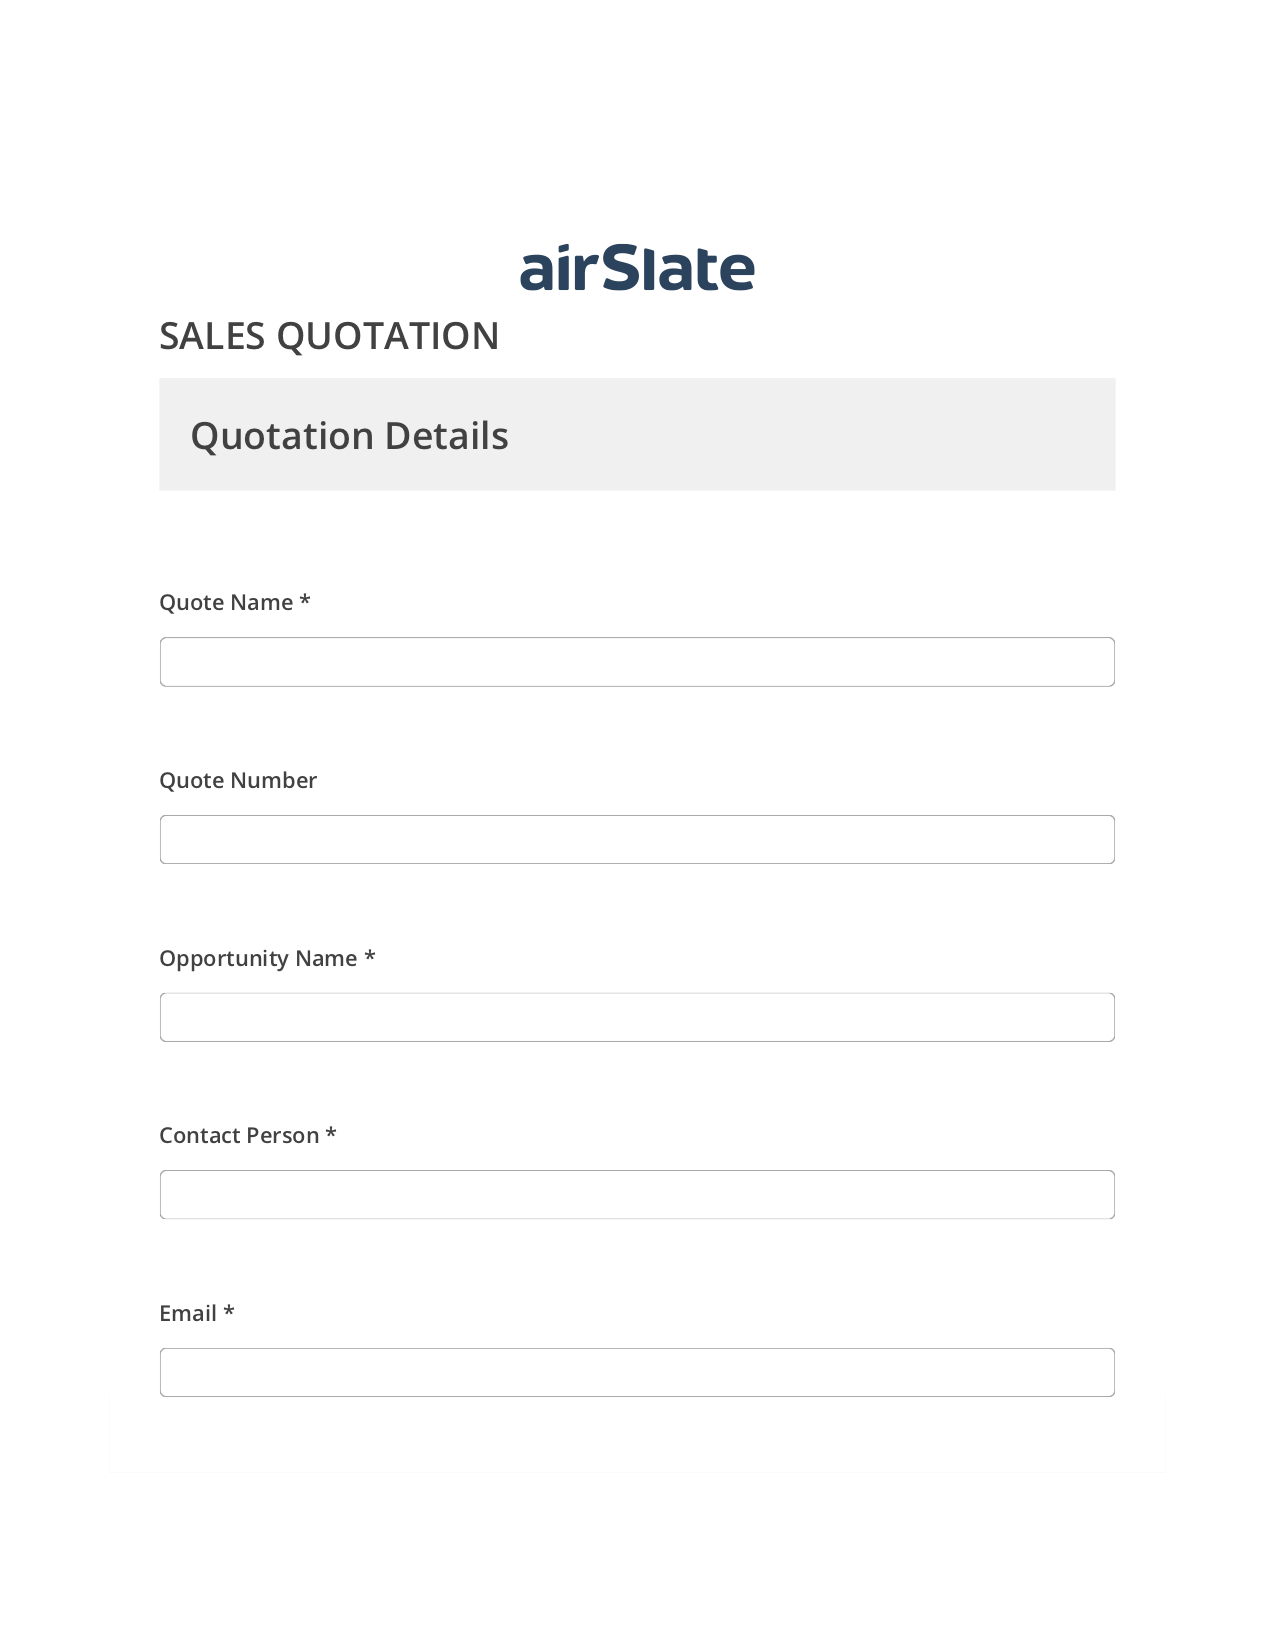 Sales Quotation Flow Create Slate every Google Sheet Update Bot